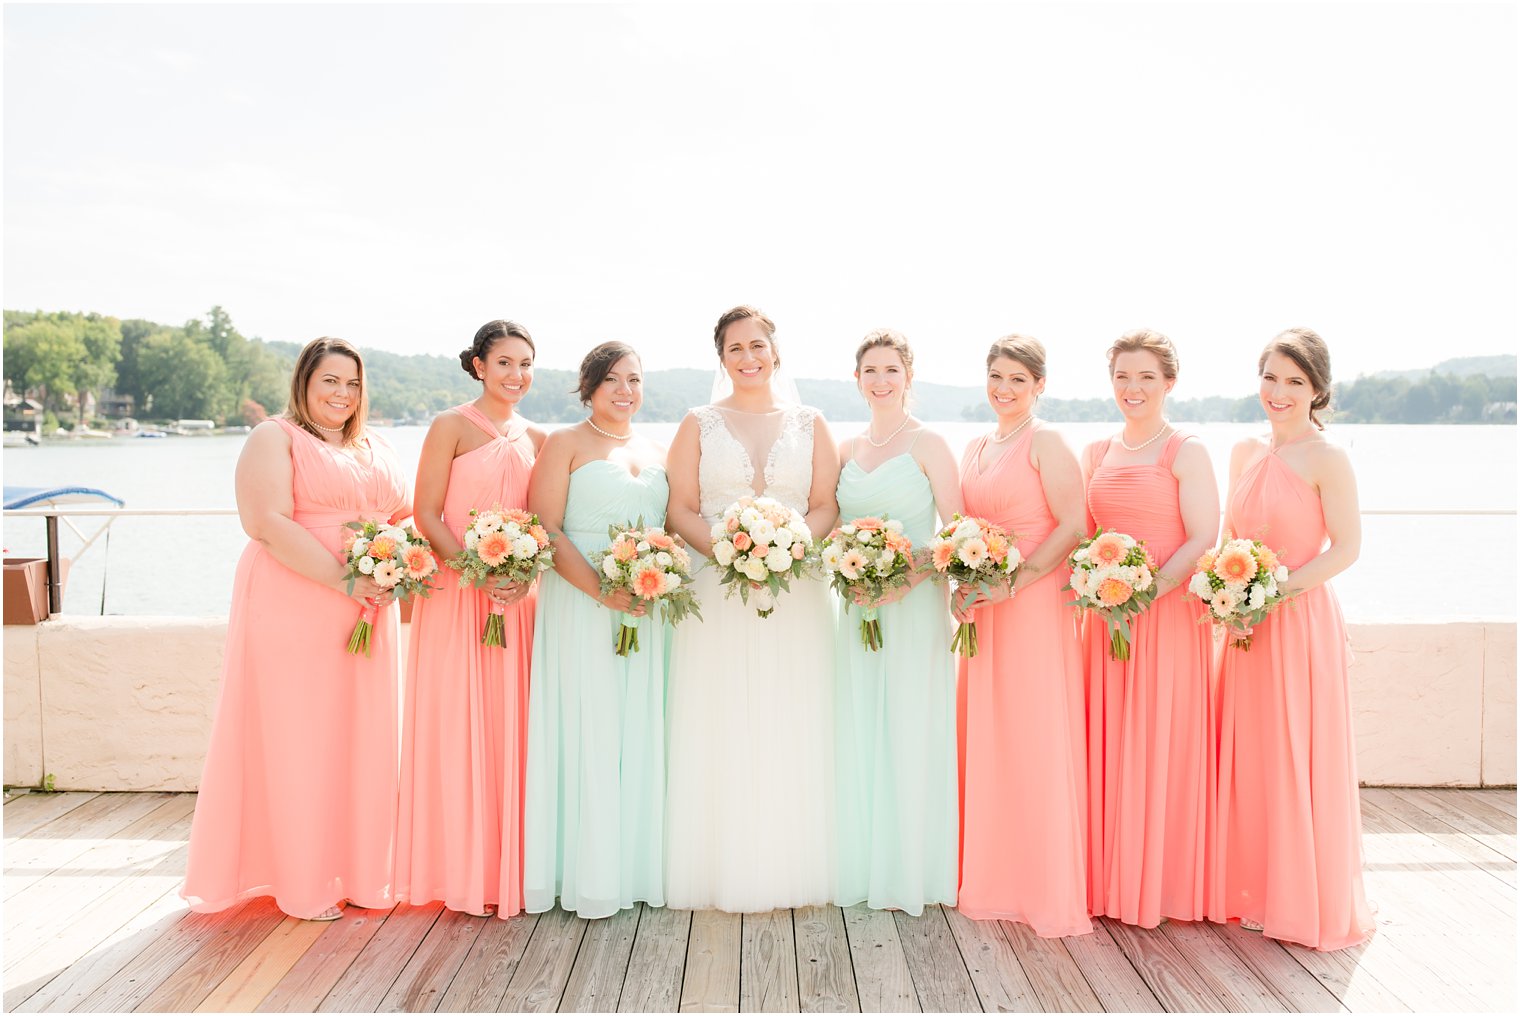 coral and ivory wedding bouquets for bridal party by Entenmann's Florist by Idalia Photography